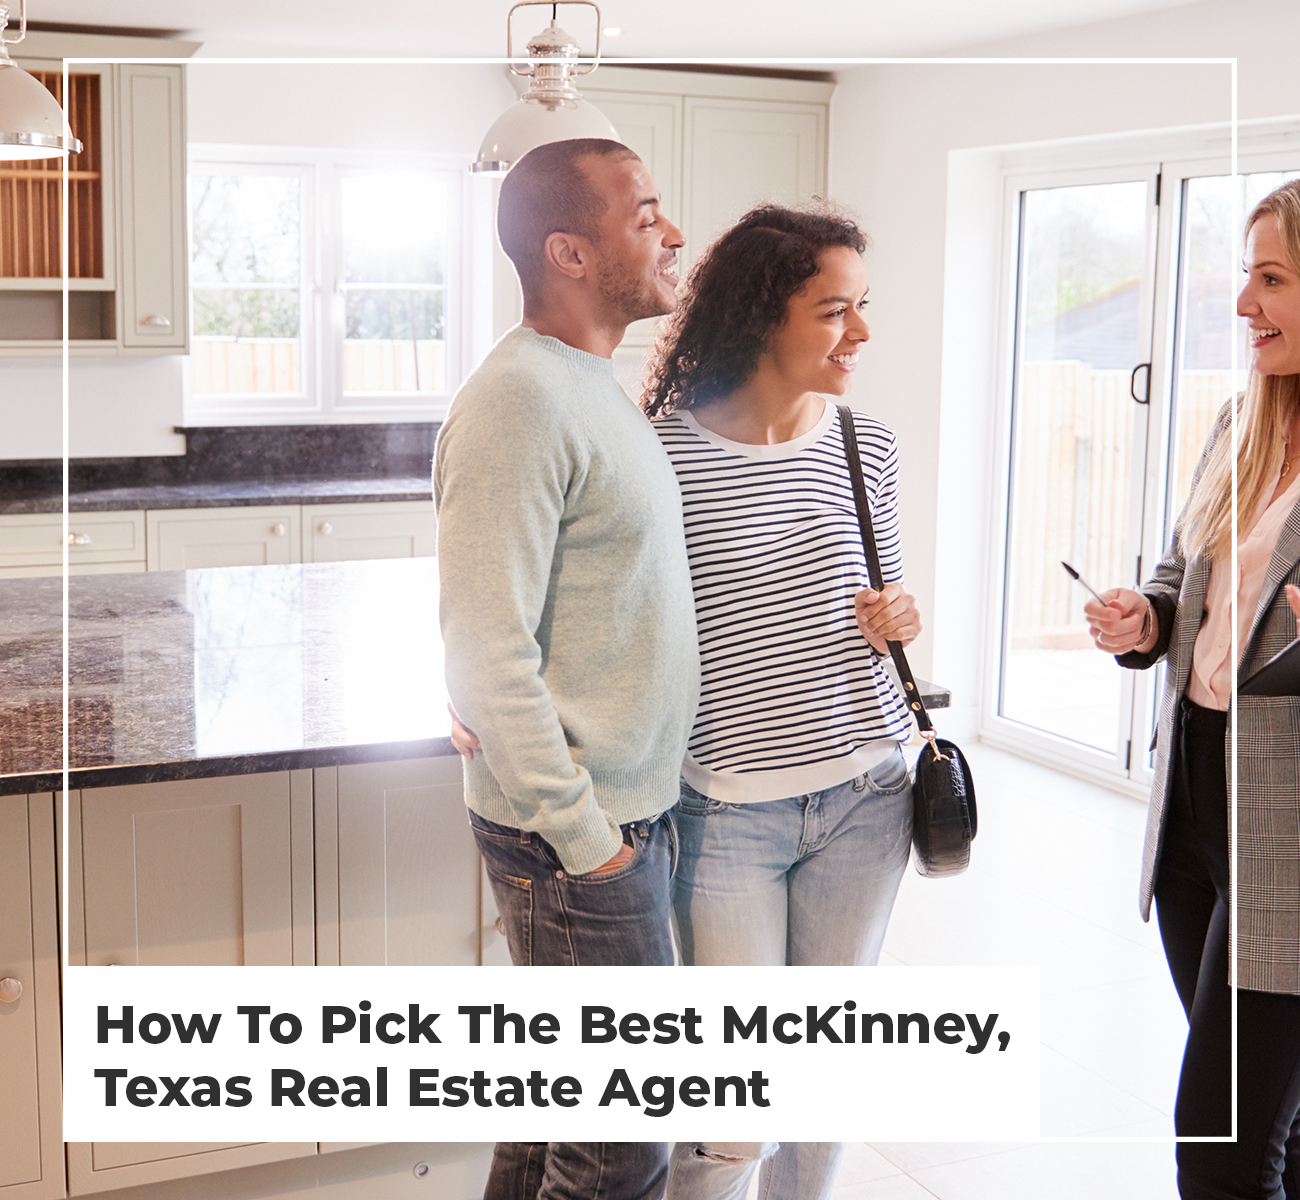 How To Pick The Best McKinney, Texas Real Estate Agent - Main Image